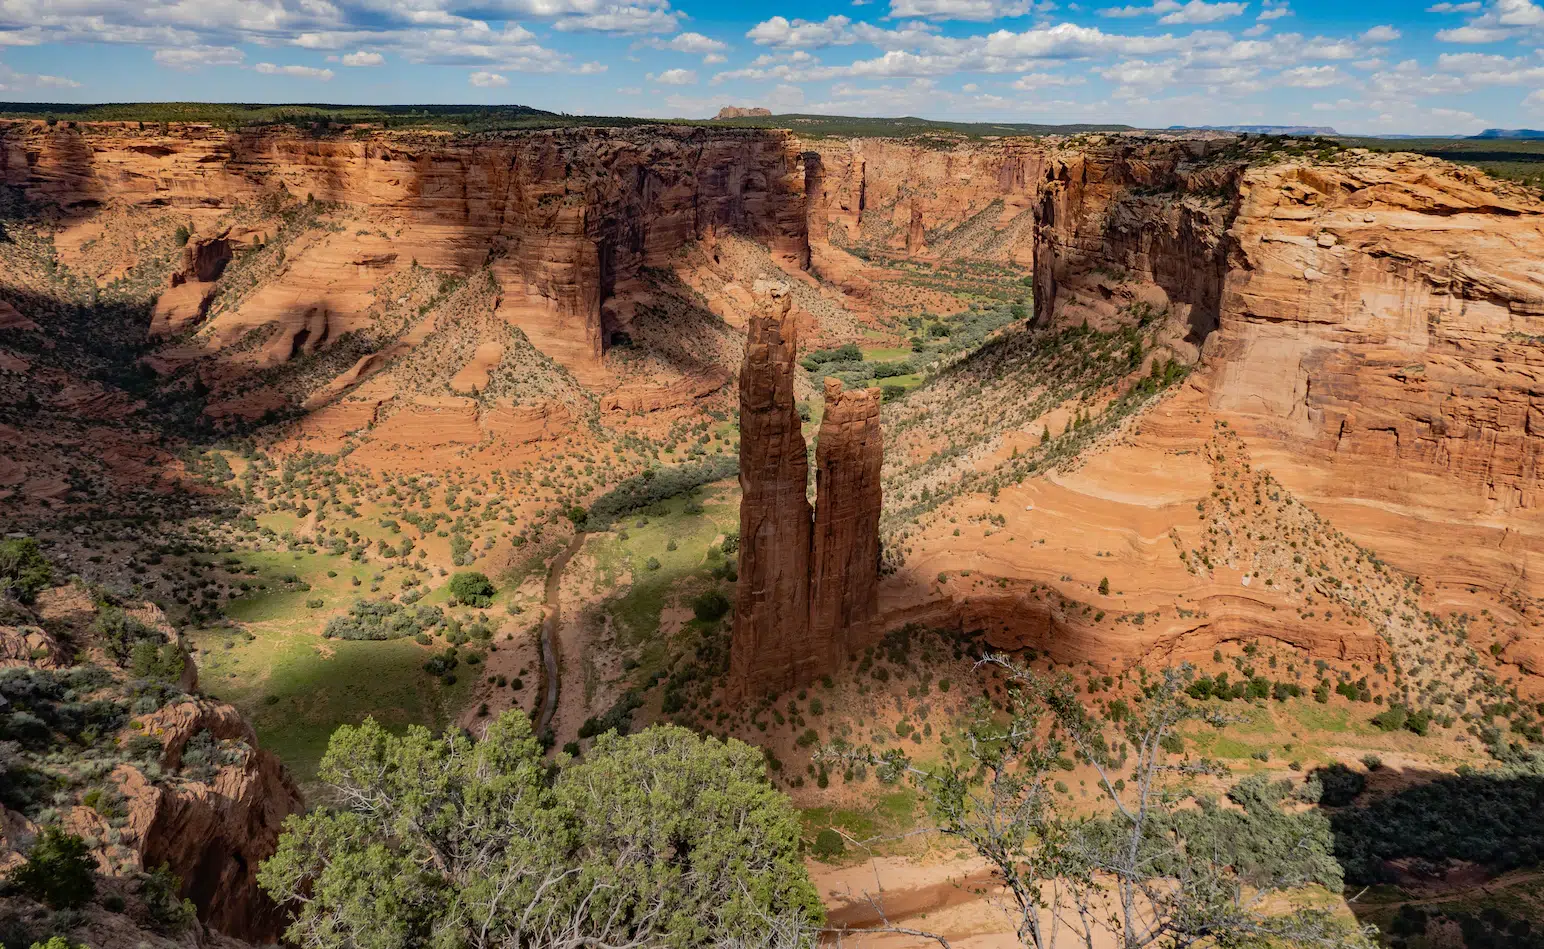 The beautiful Canyon de Chelly National Monument